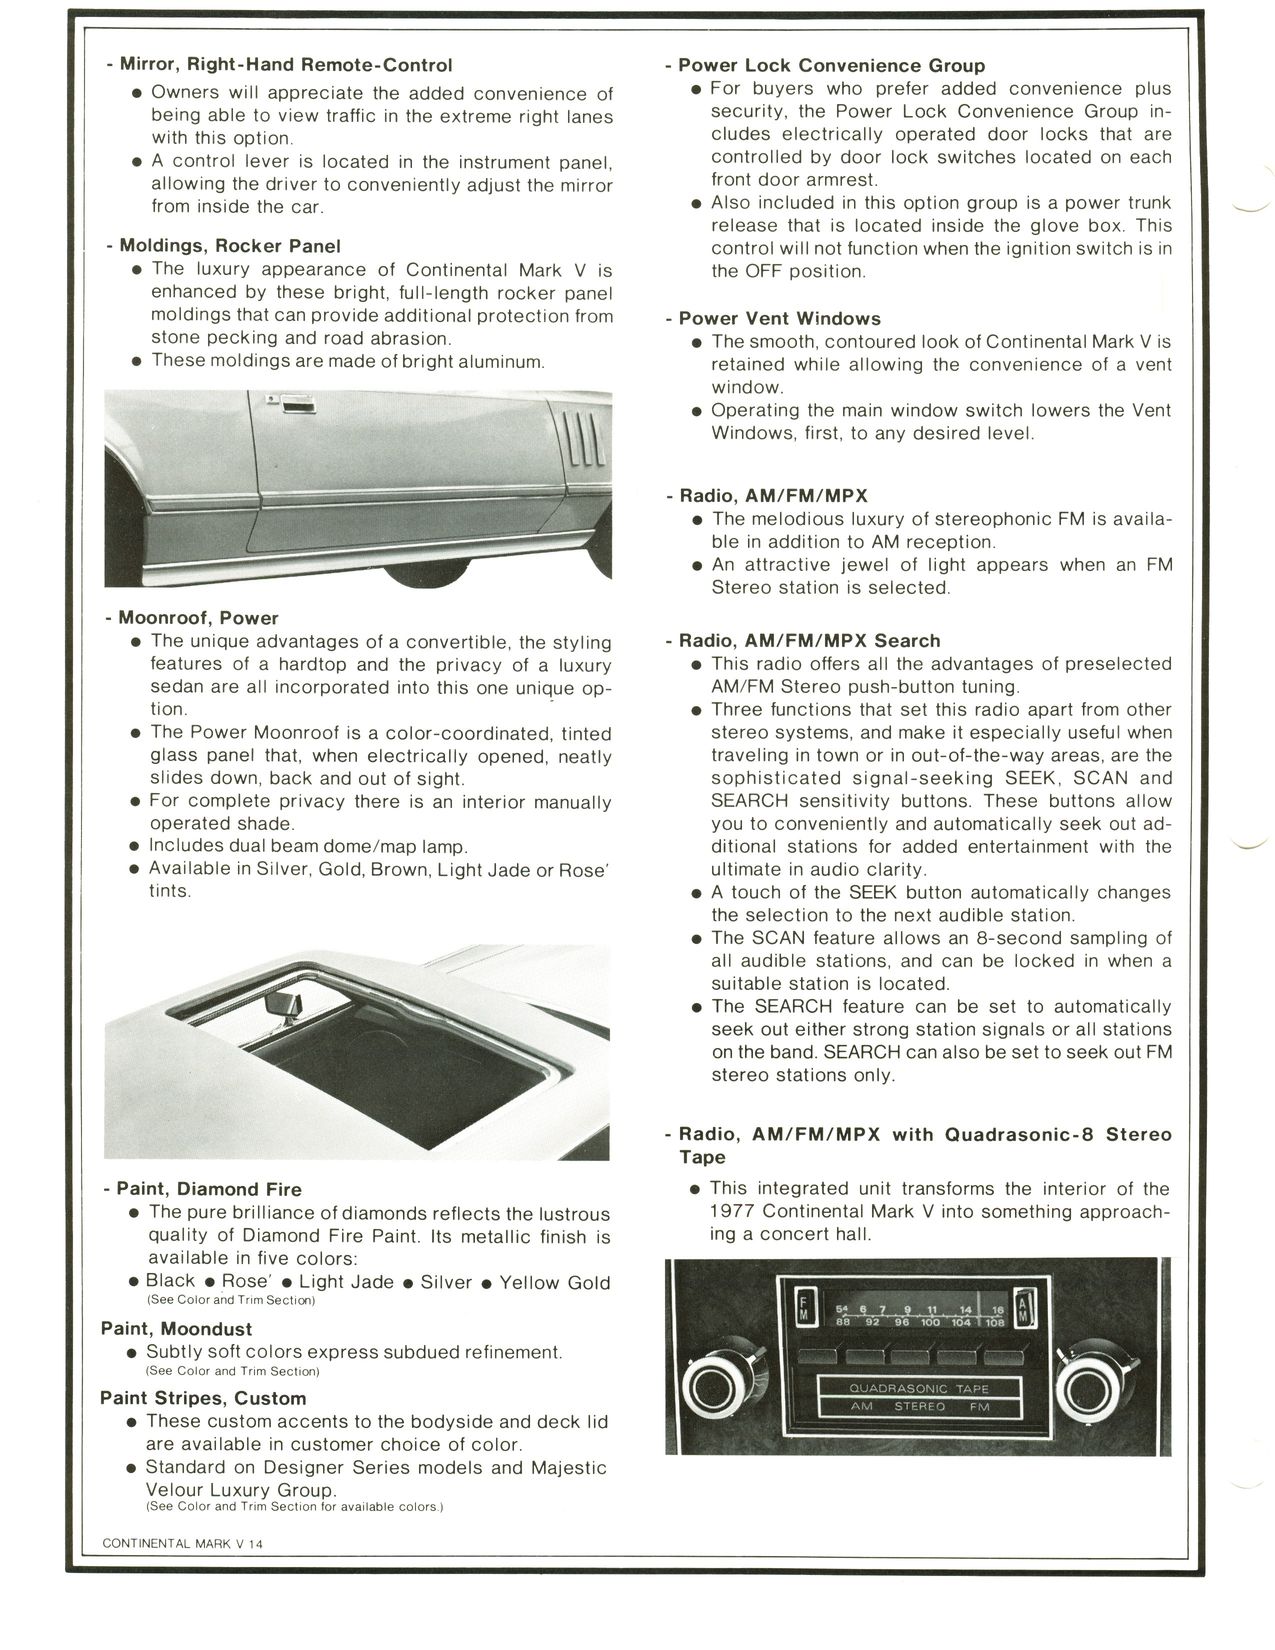 1977_Continental_Product_Facts_Book-1-14